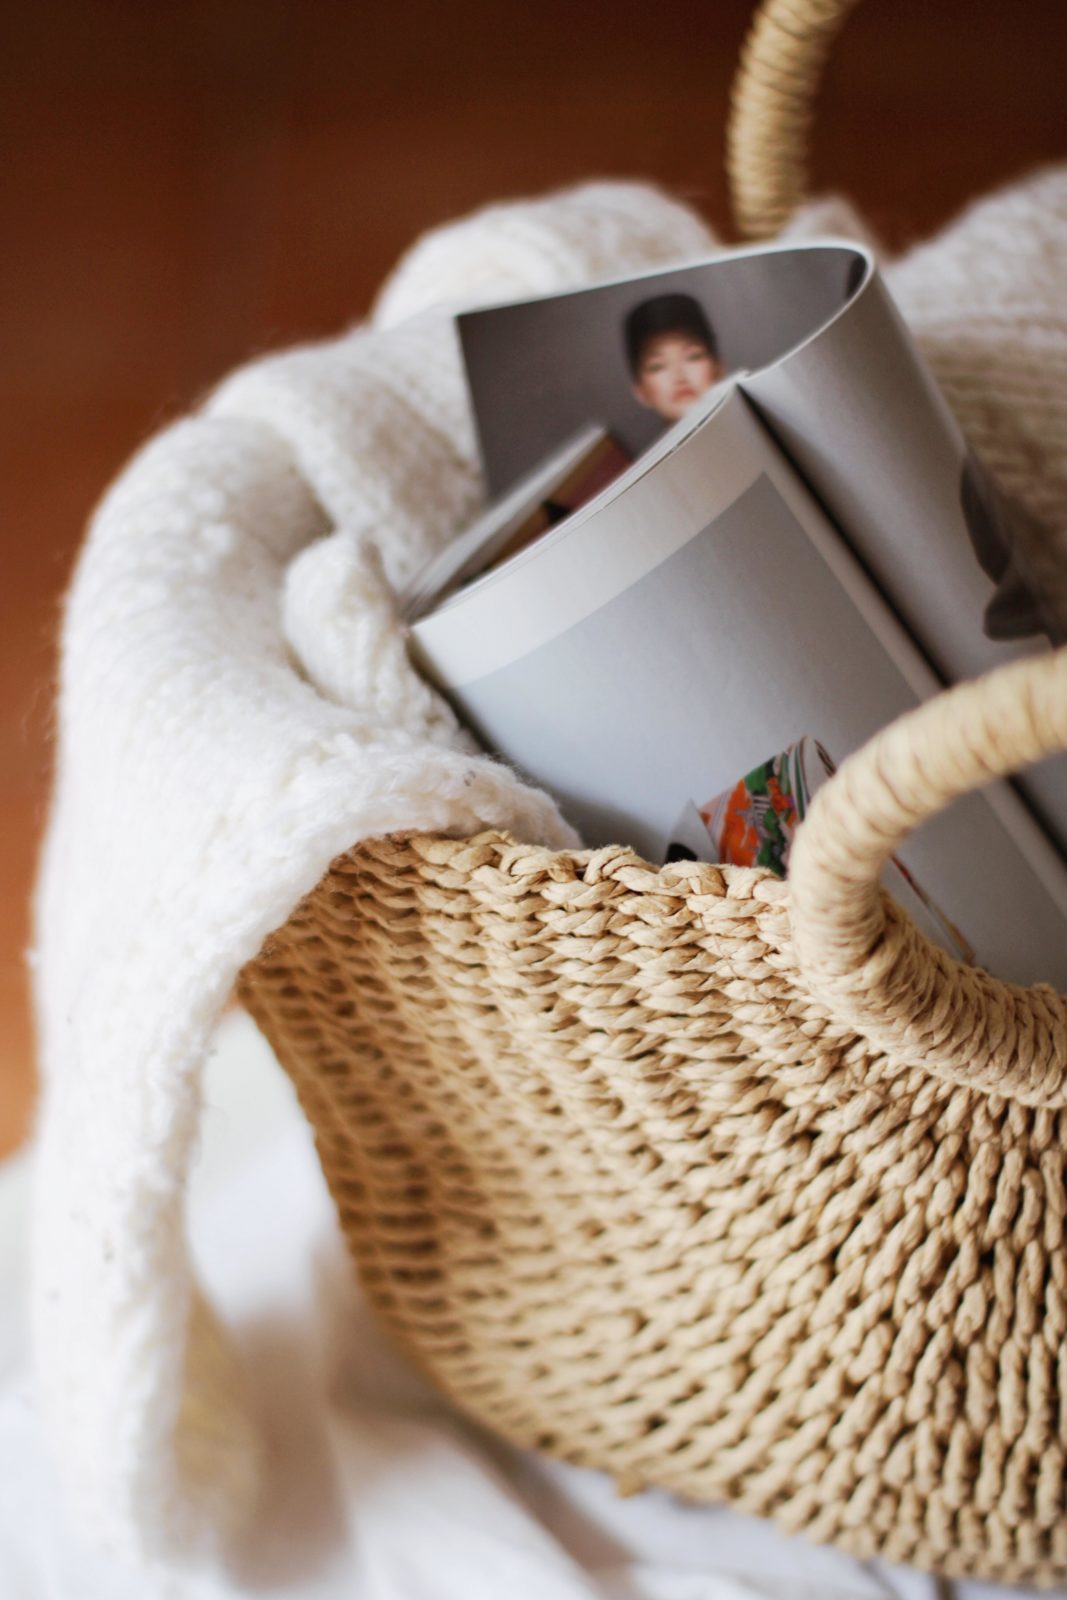 The Essentials Basket You’ll Want to Keep on Hand for Overnight Guests